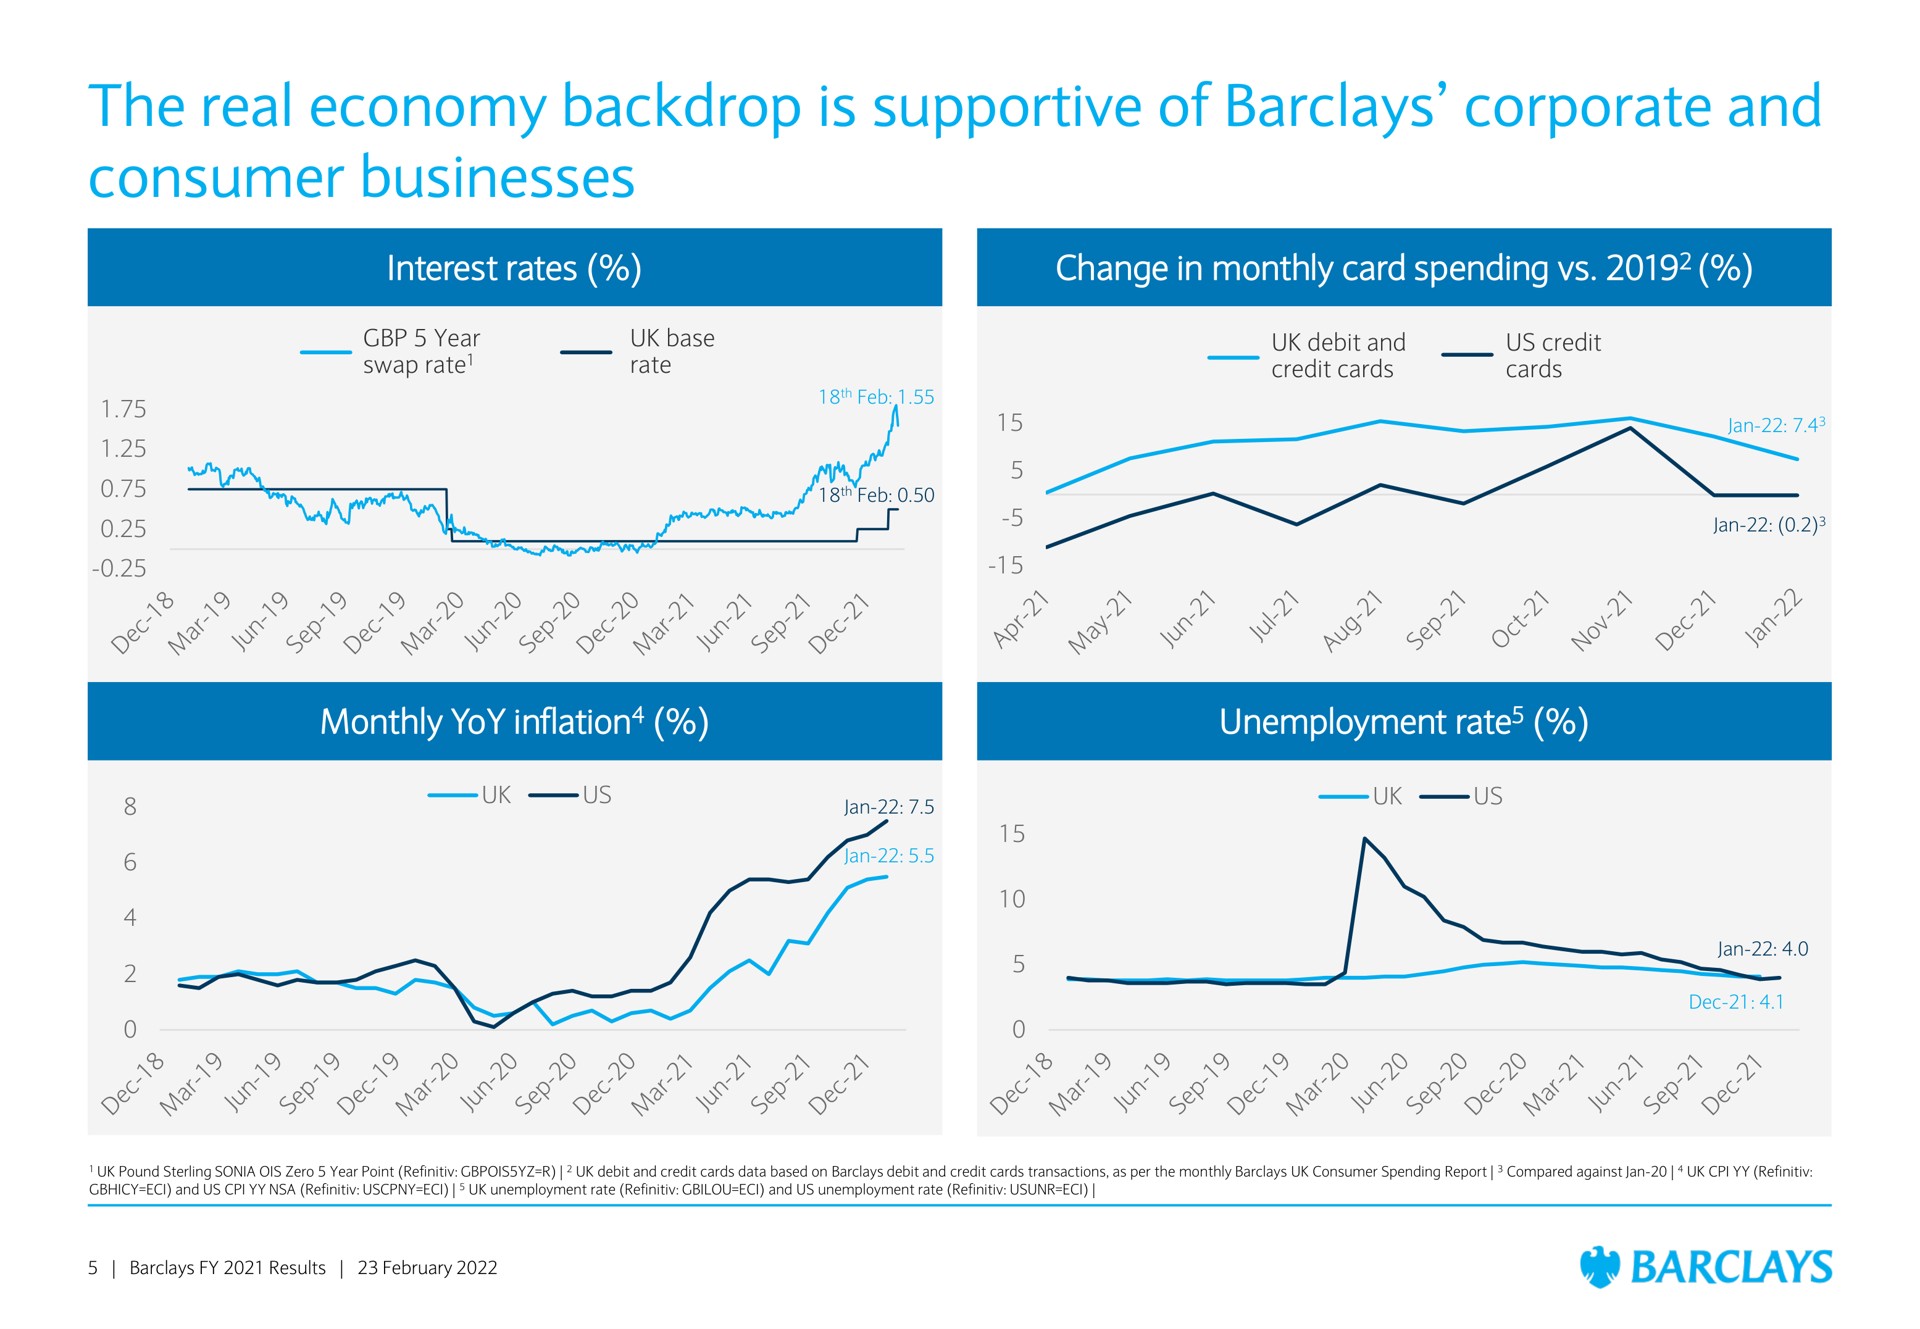 the real economy backdrop is supportive of corporate and consumer businesses | Barclays